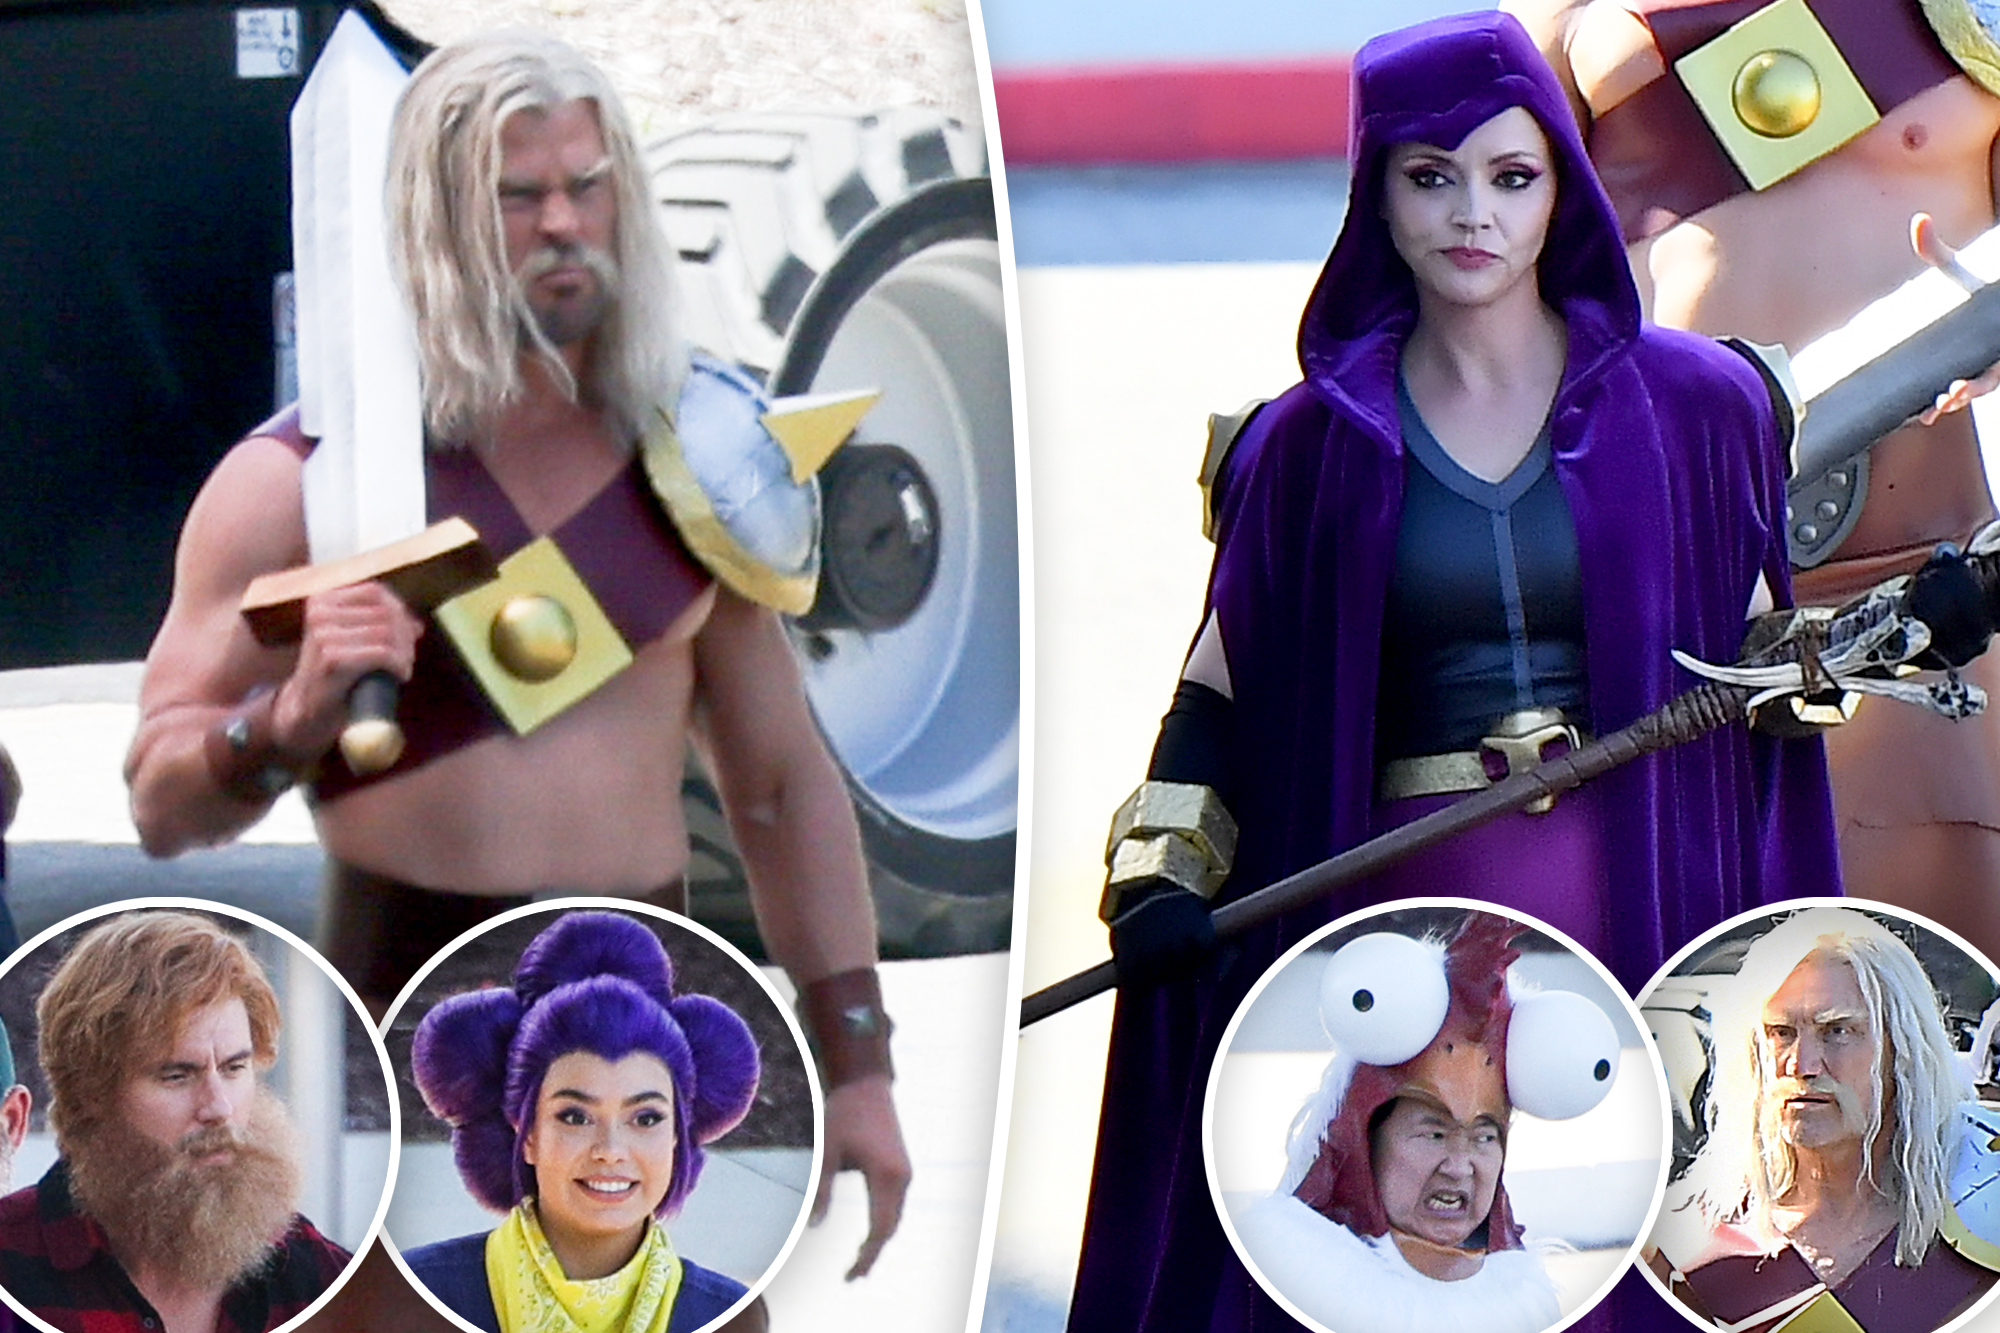 Chris Hemsworth films hilarious "Clash of Clans" advert — can you guess the other stars?